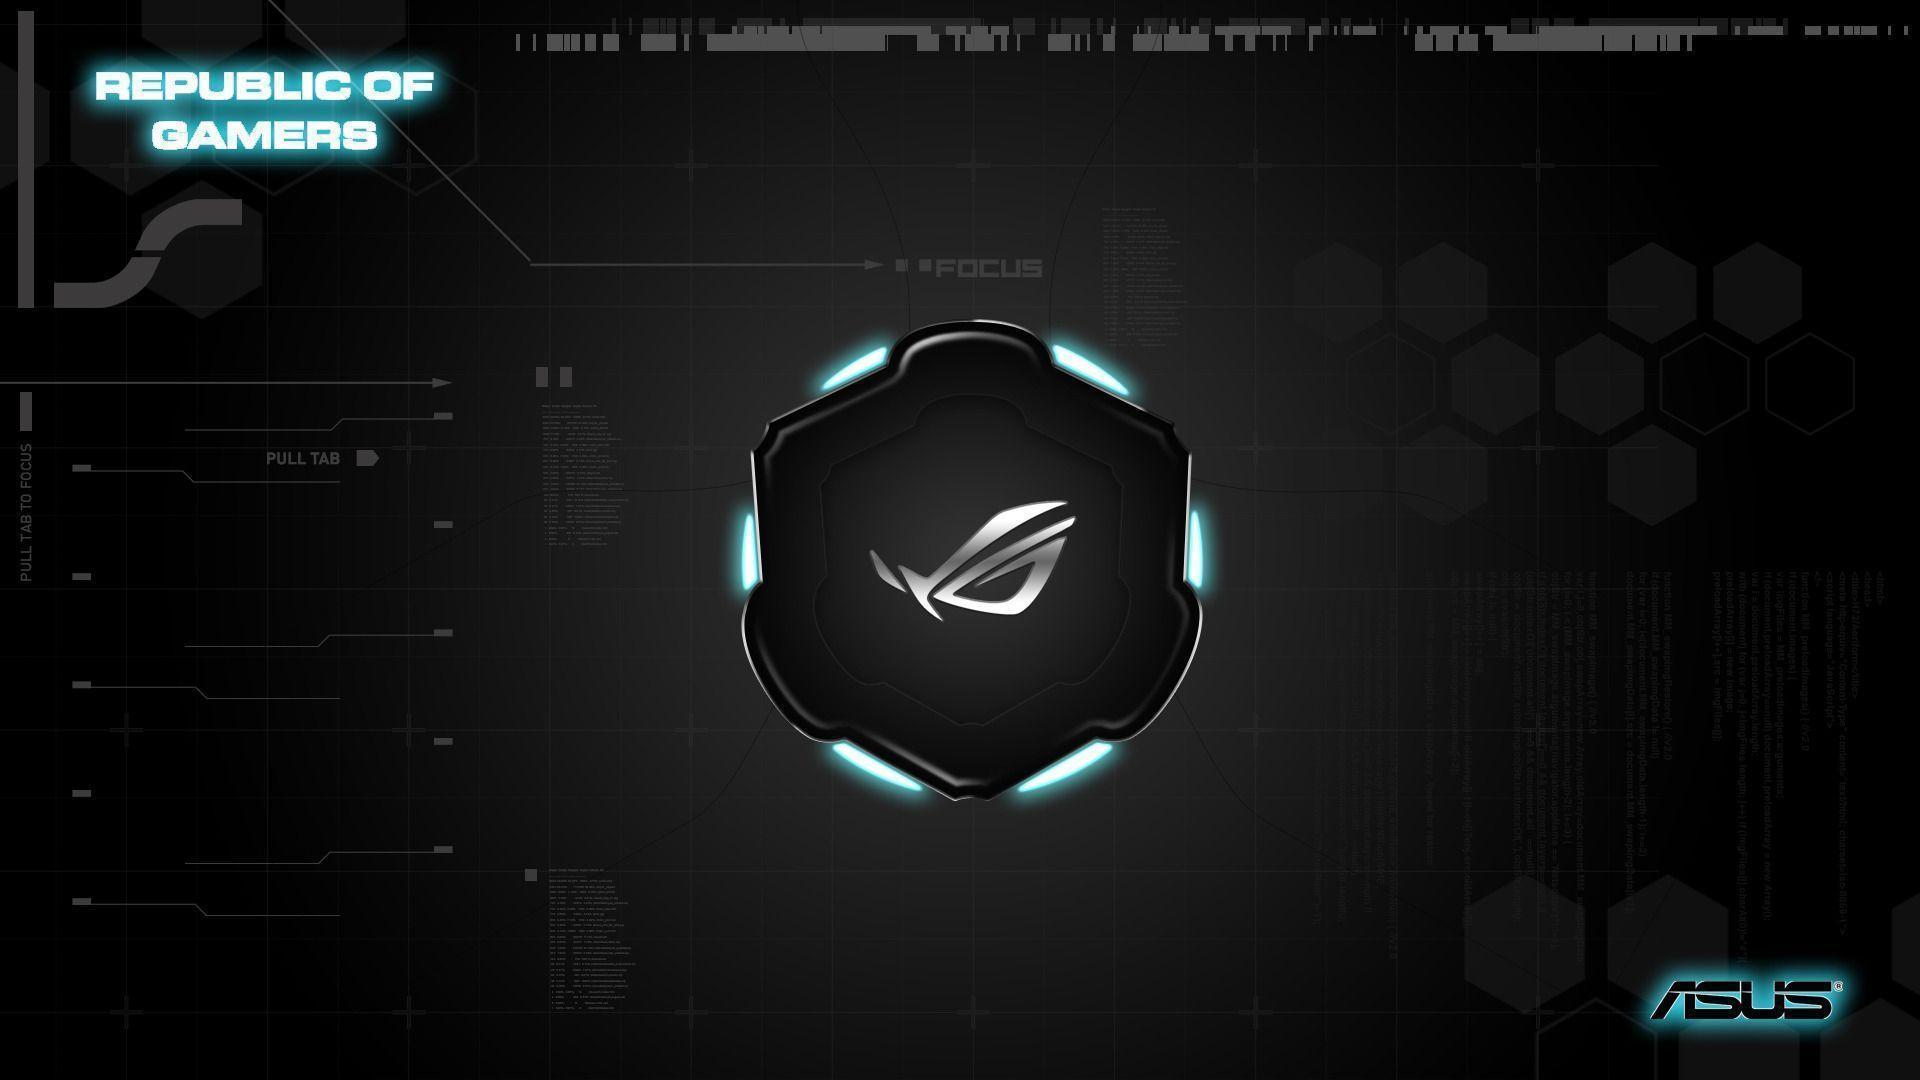 ROG Wallpaper Competition Winners! of Gamers